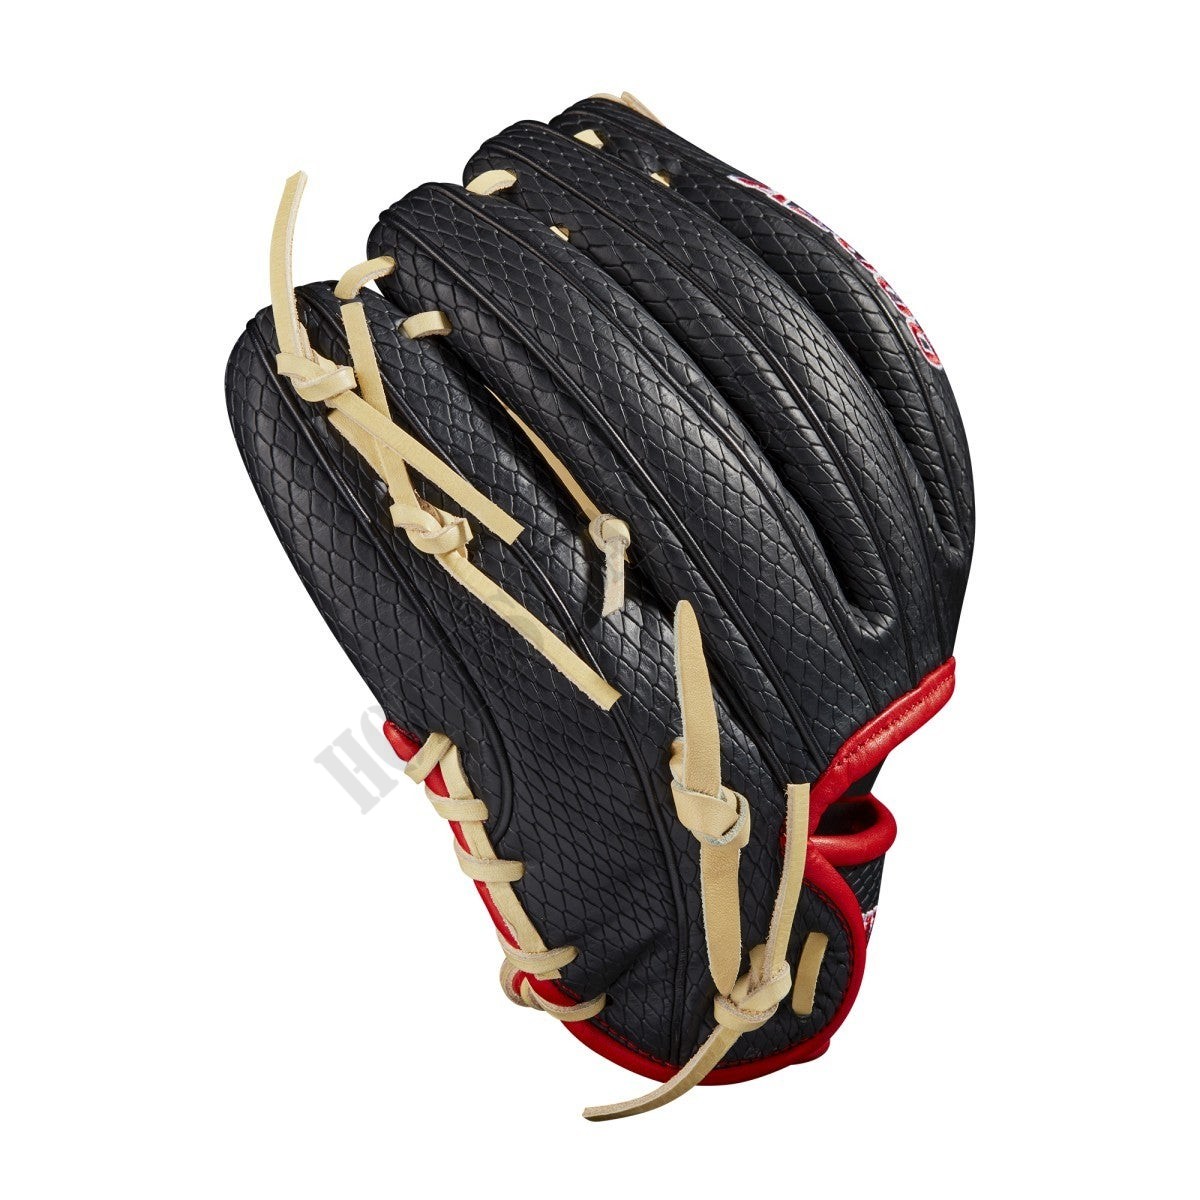 2021 A2000 PF88SS 11.25" Pedroia Fit Infield Baseball Glove ● Wilson Promotions - -4